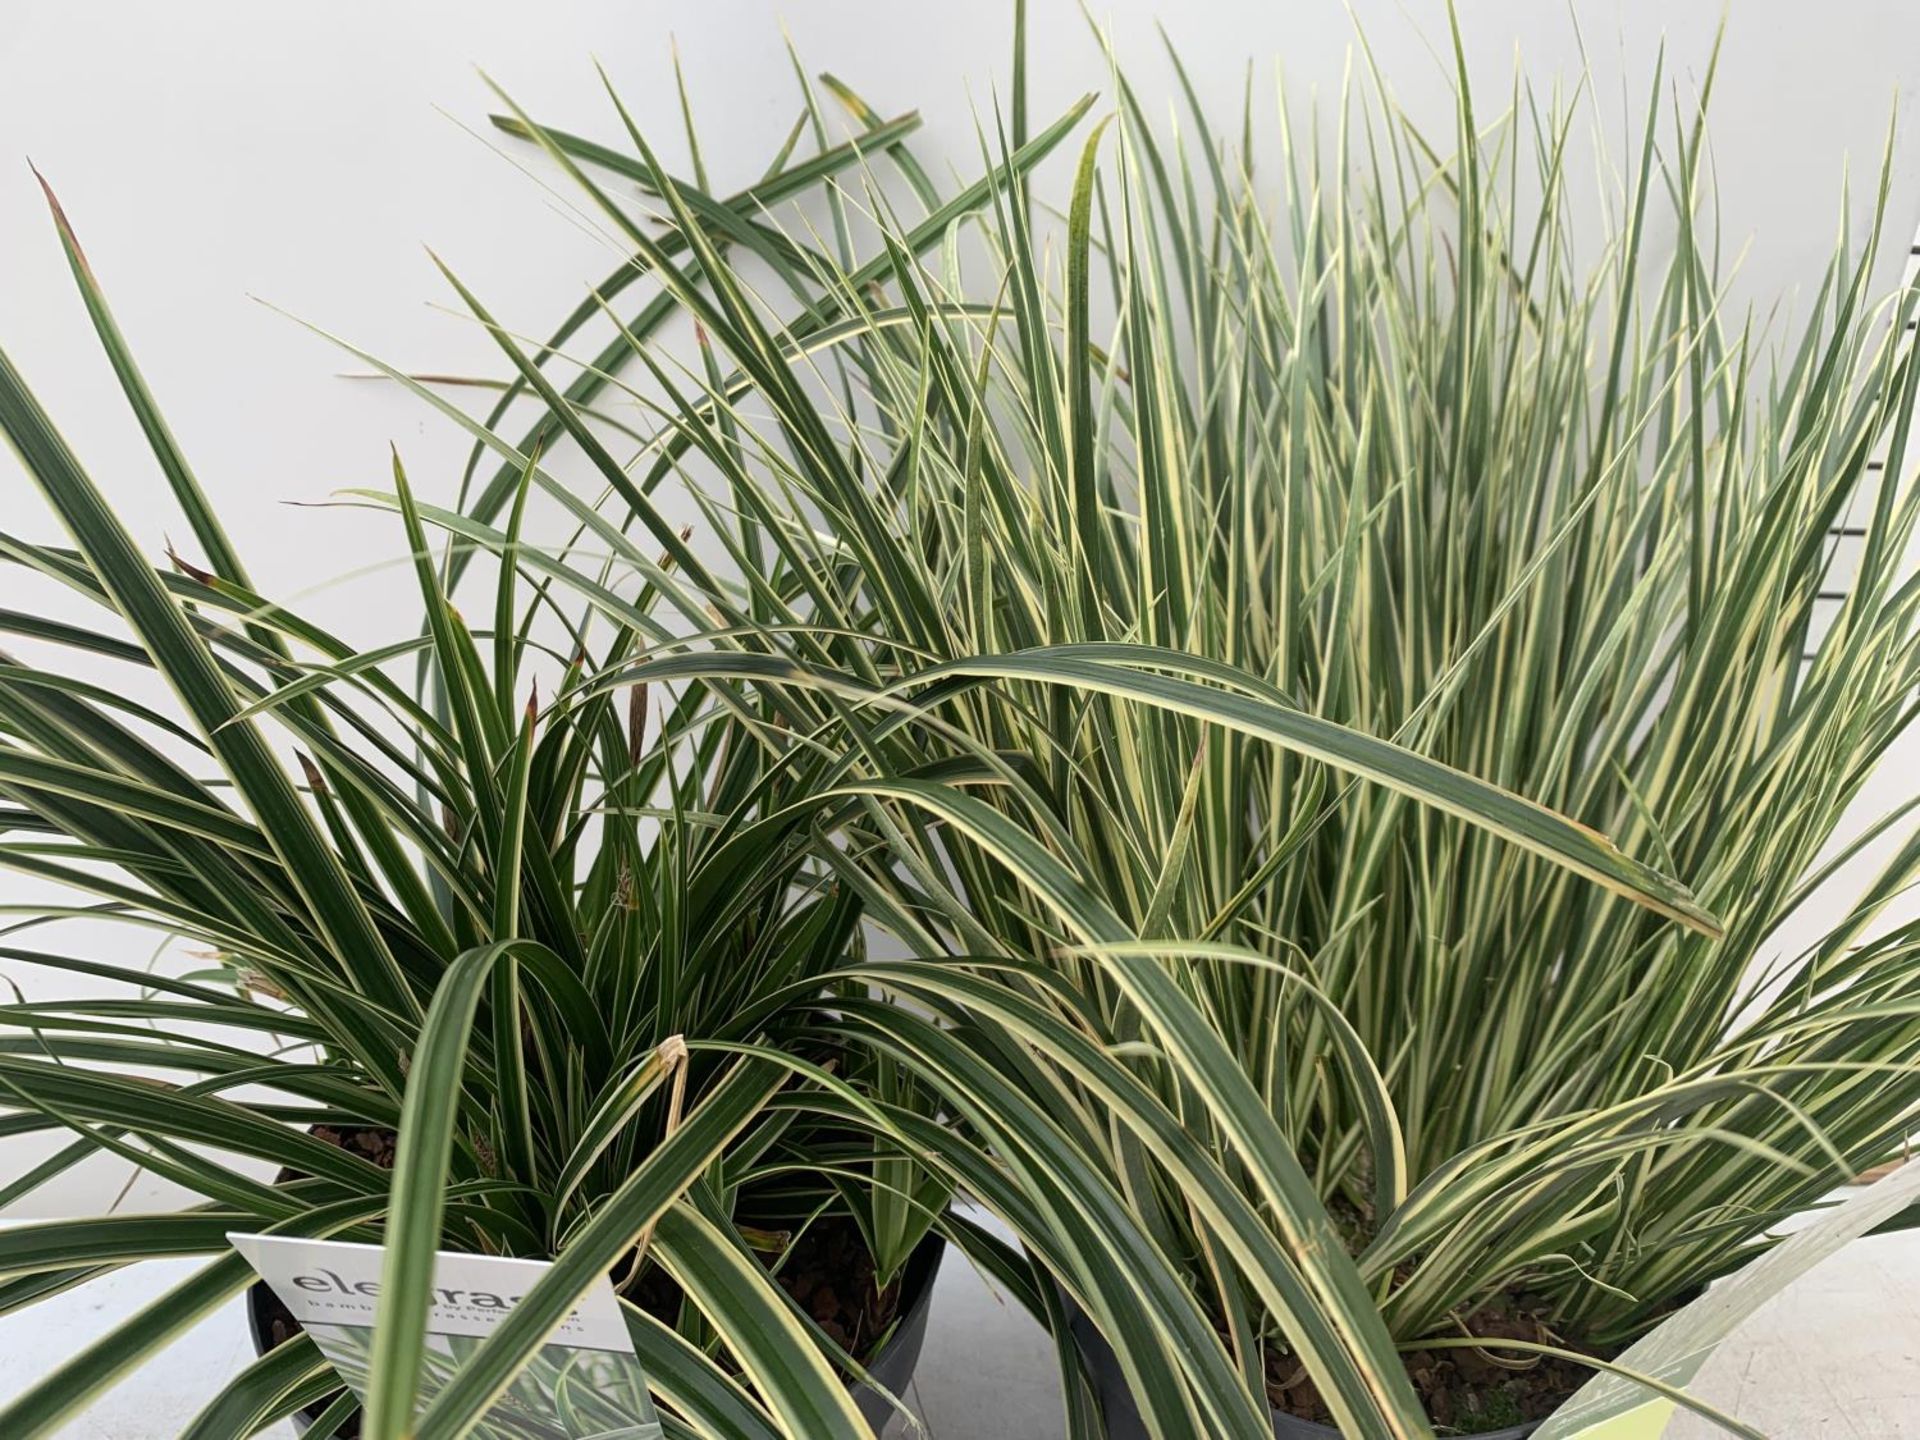 TWO HARDY ORNAMENTAL GRASSES ACORUS GARAMINEUS AND CAREX MORROWII 'ICE DANCE' IN 3 LTR POTS APPROX - Image 3 of 7